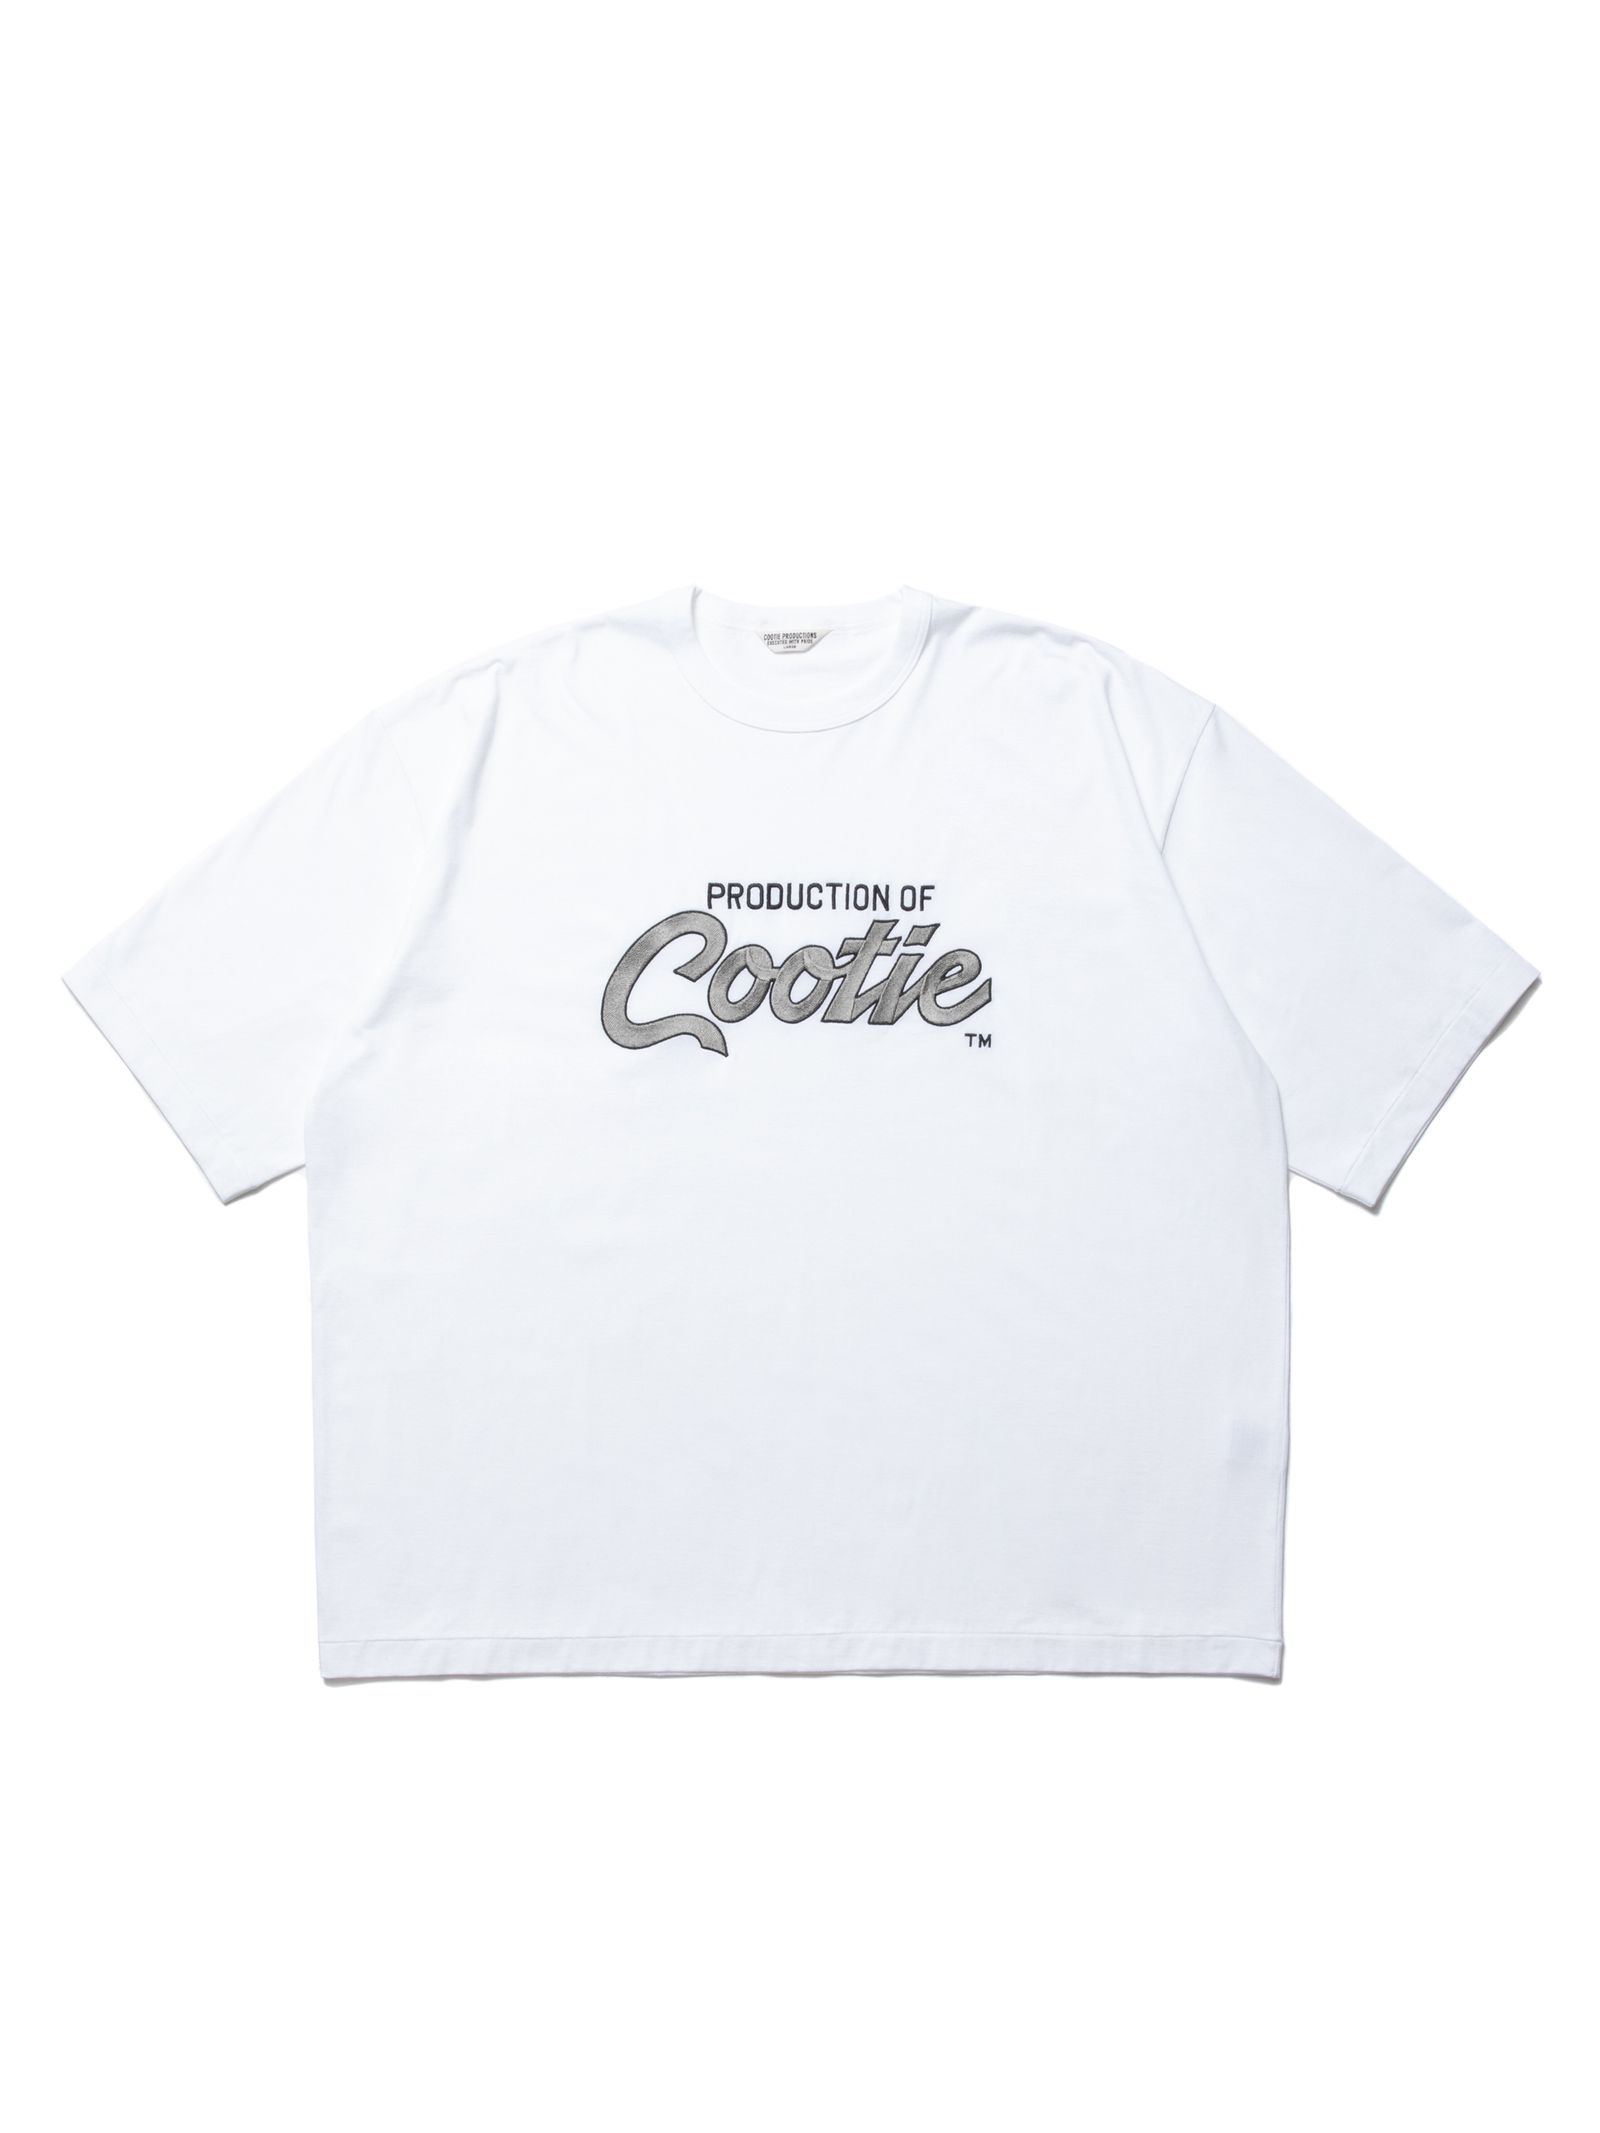 COOTIE PRODUCTIONS   Embroidery Oversized L/S Tee PRODUCTION OF